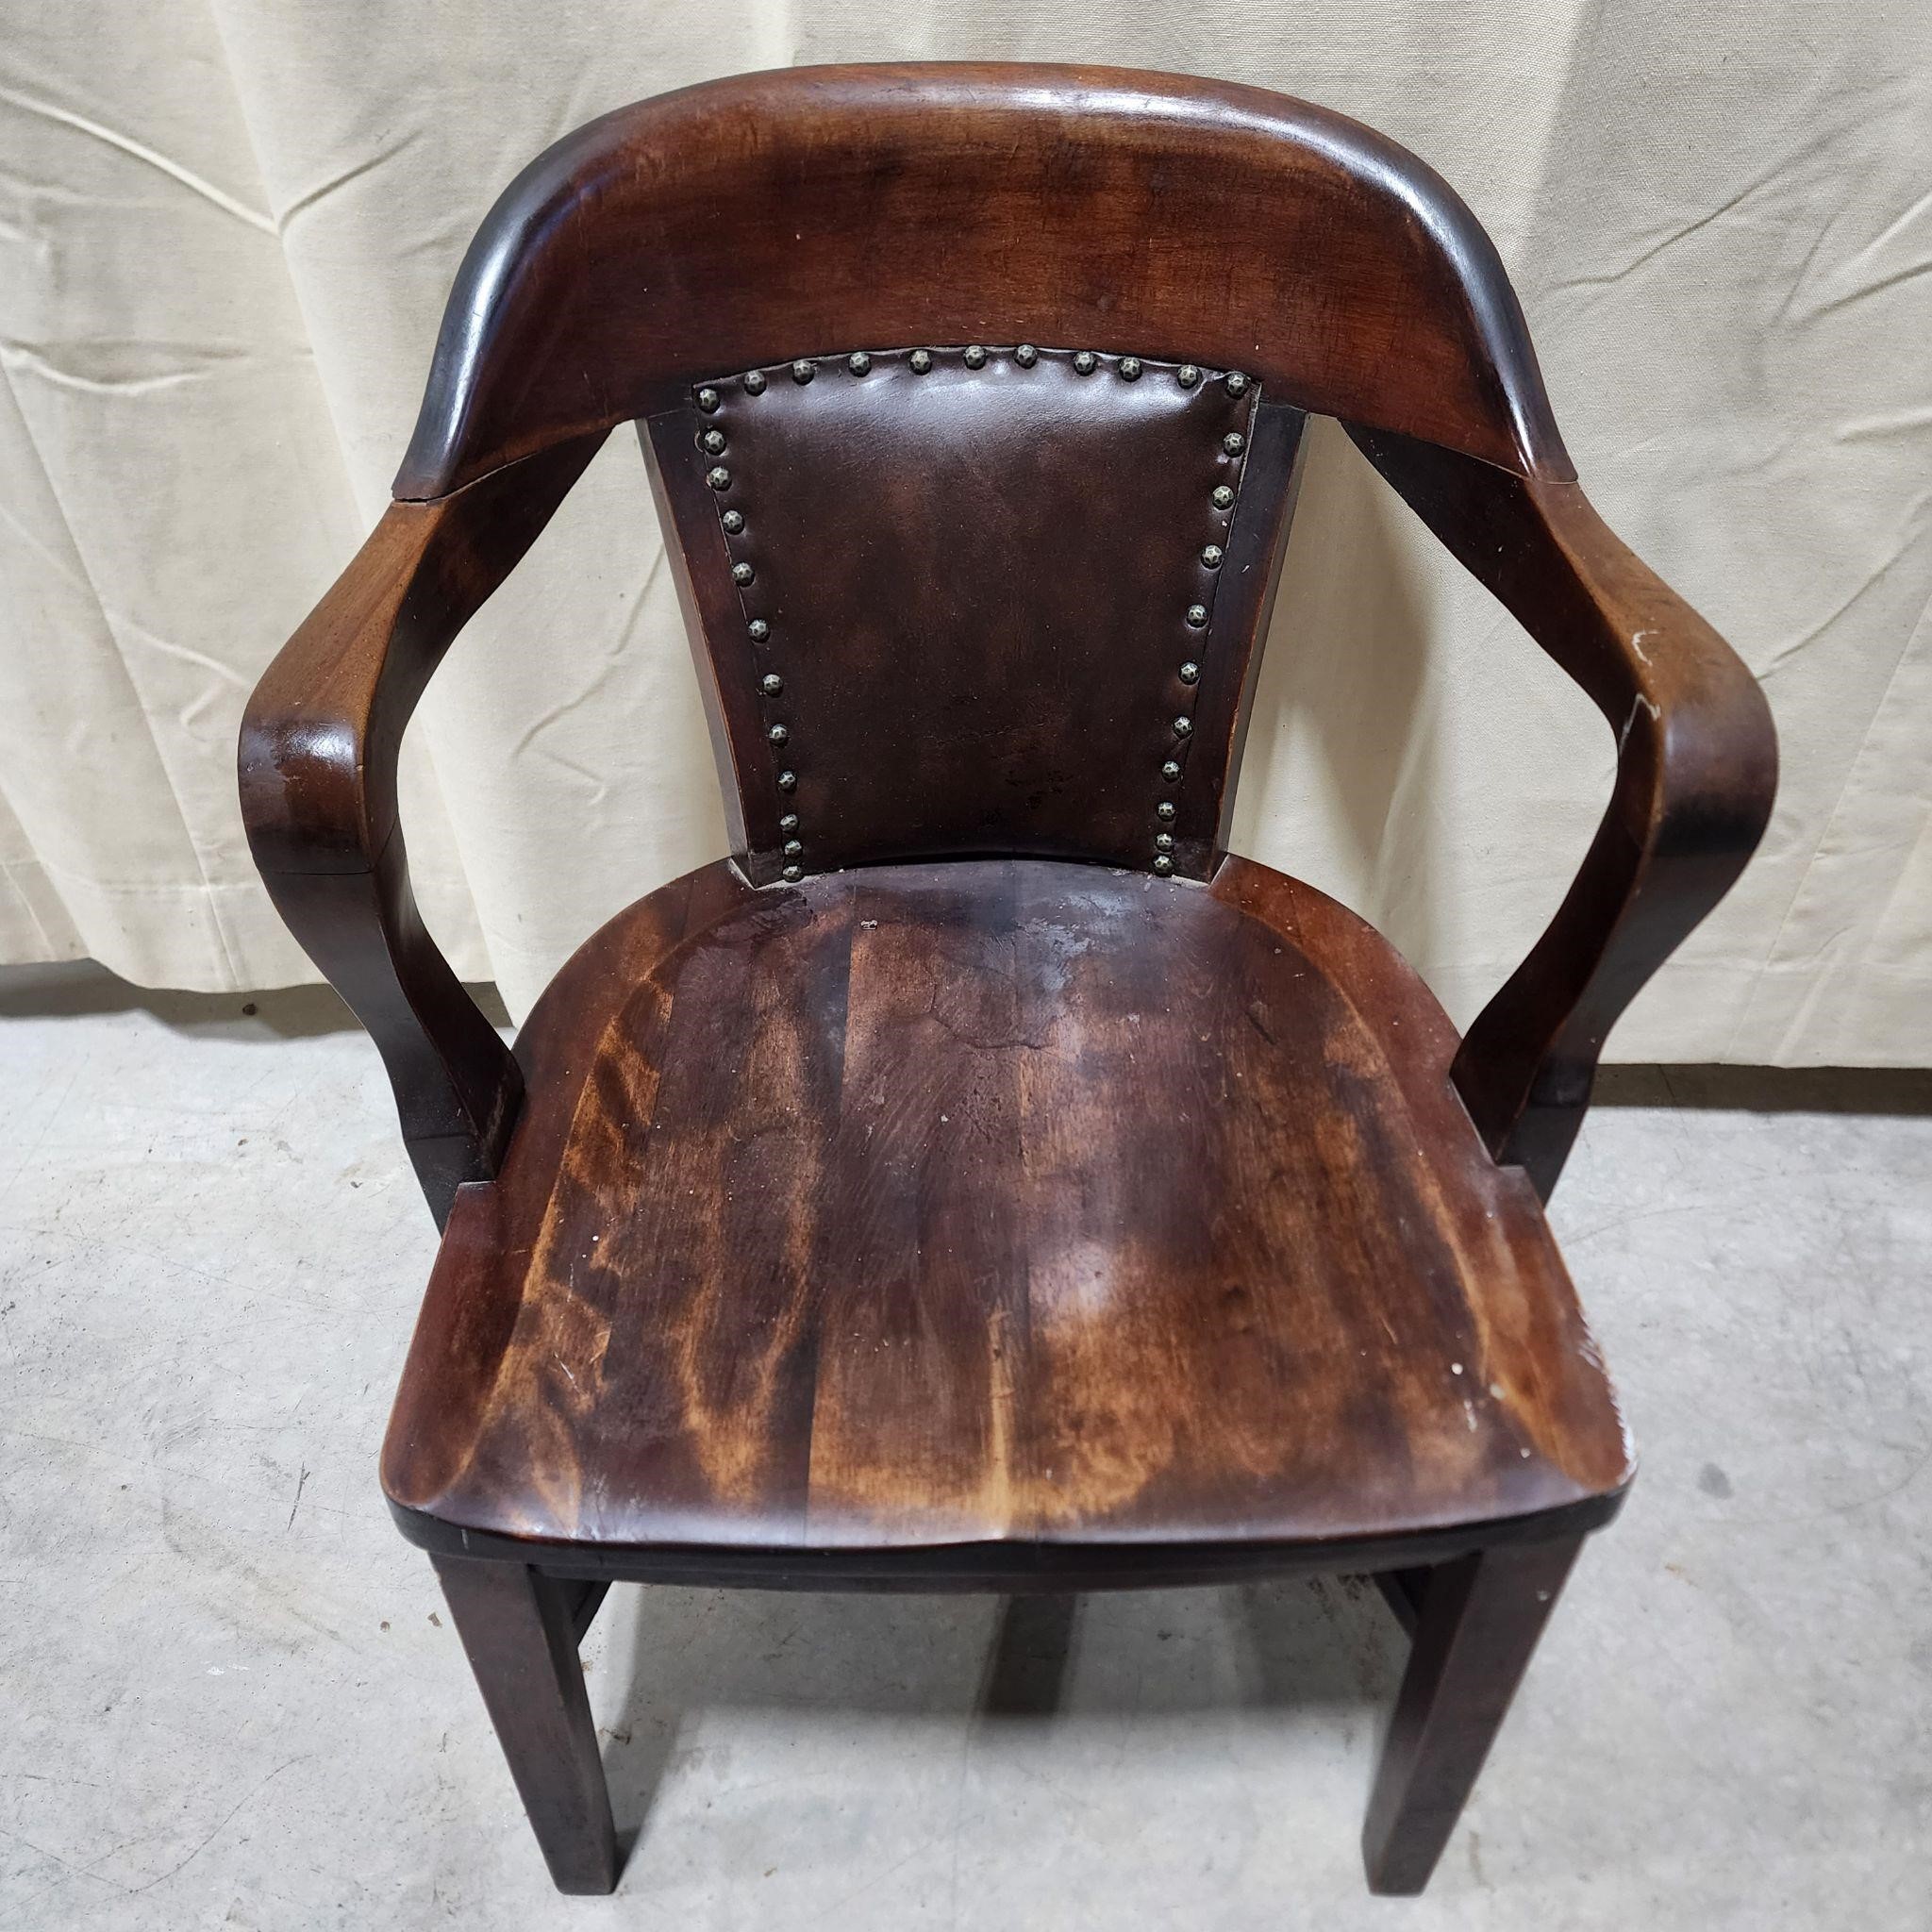 Antique wood & leather Lawyer's chair